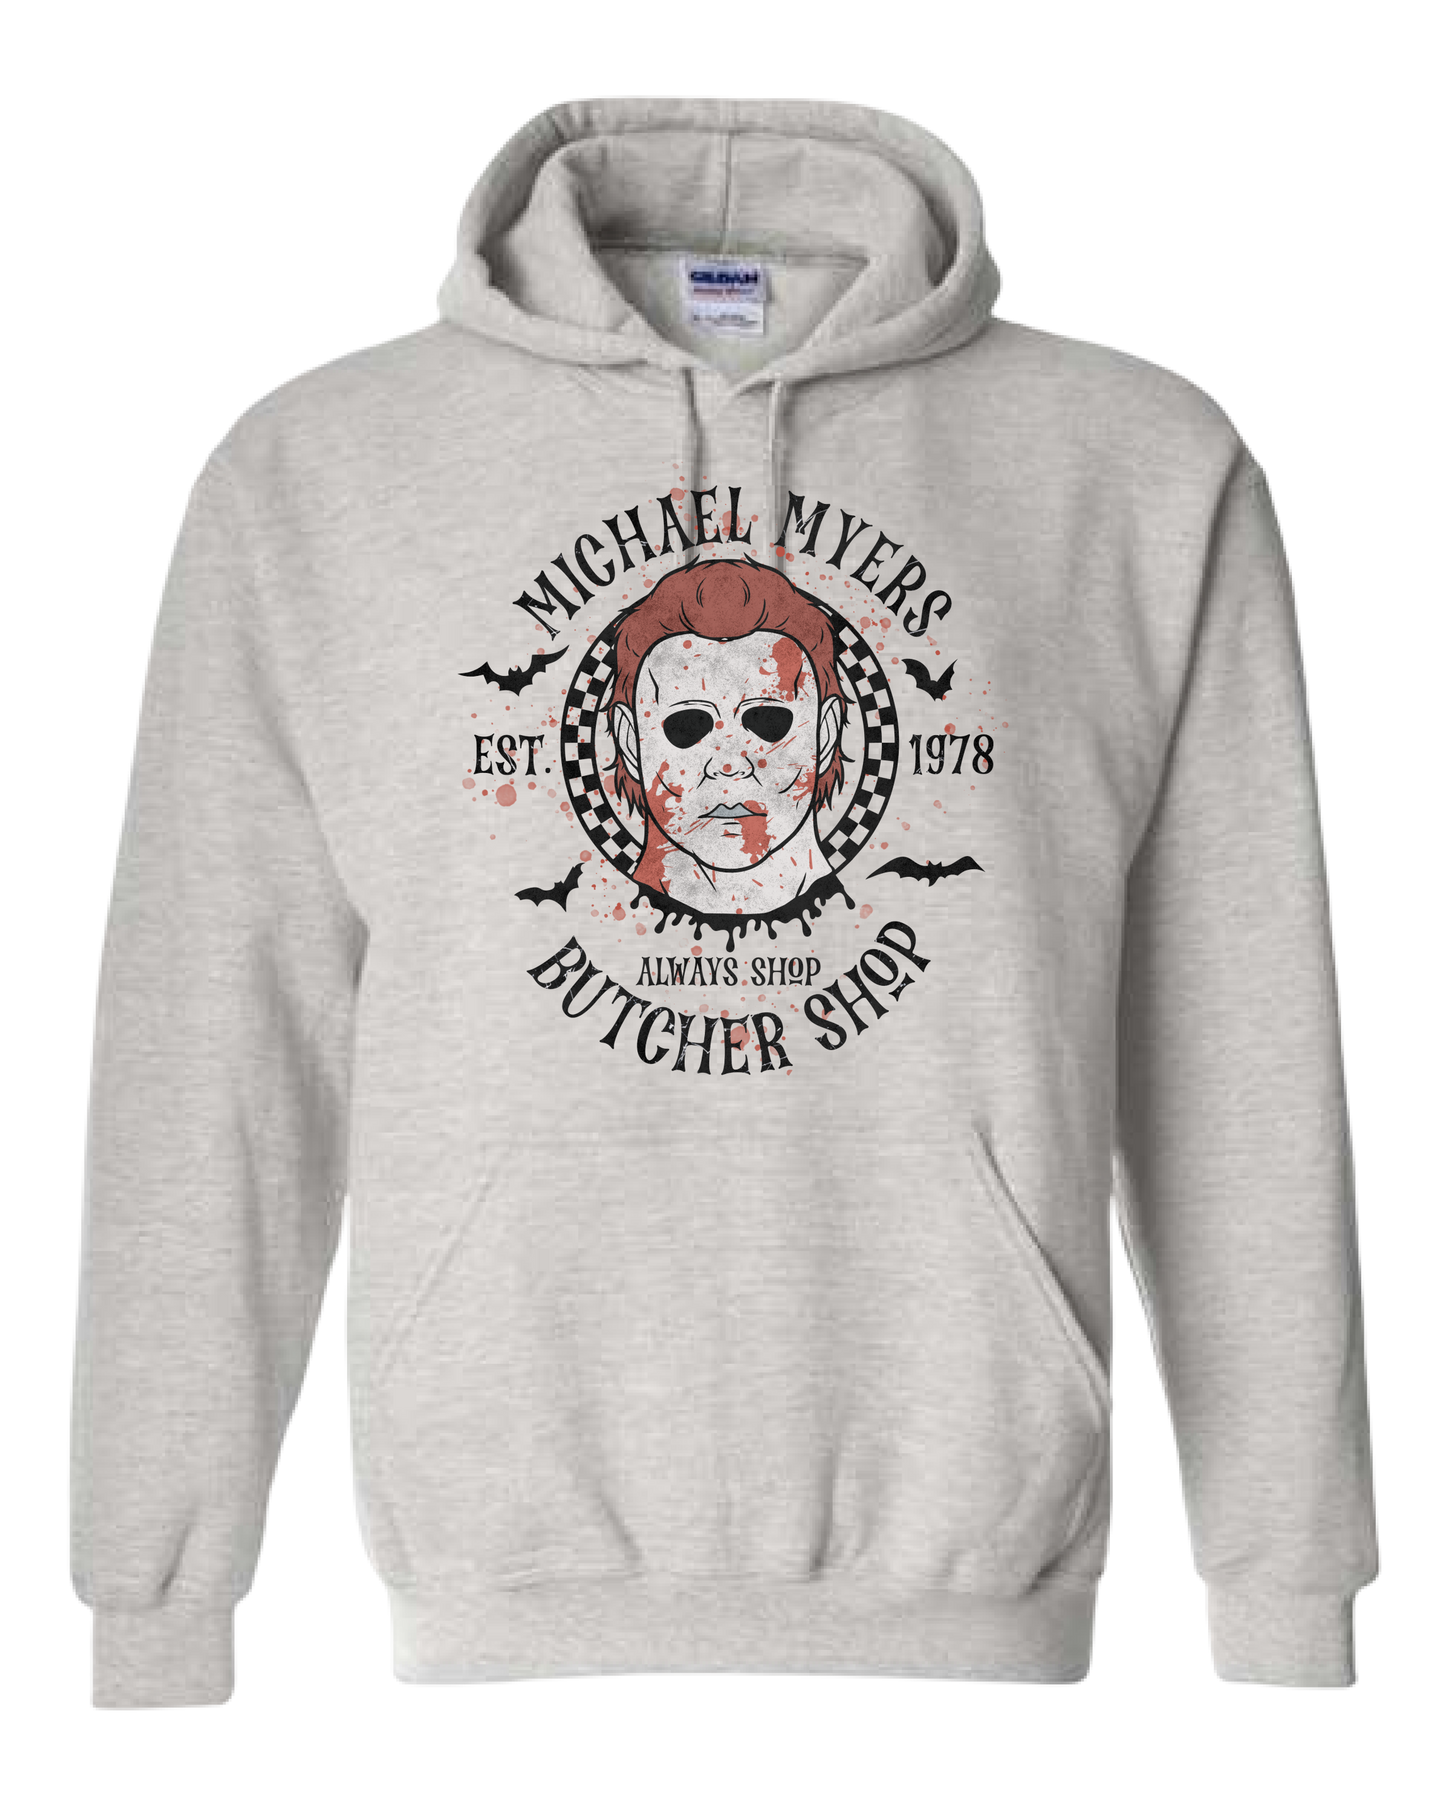 Micheal Myers Butcher Shop Hoodie